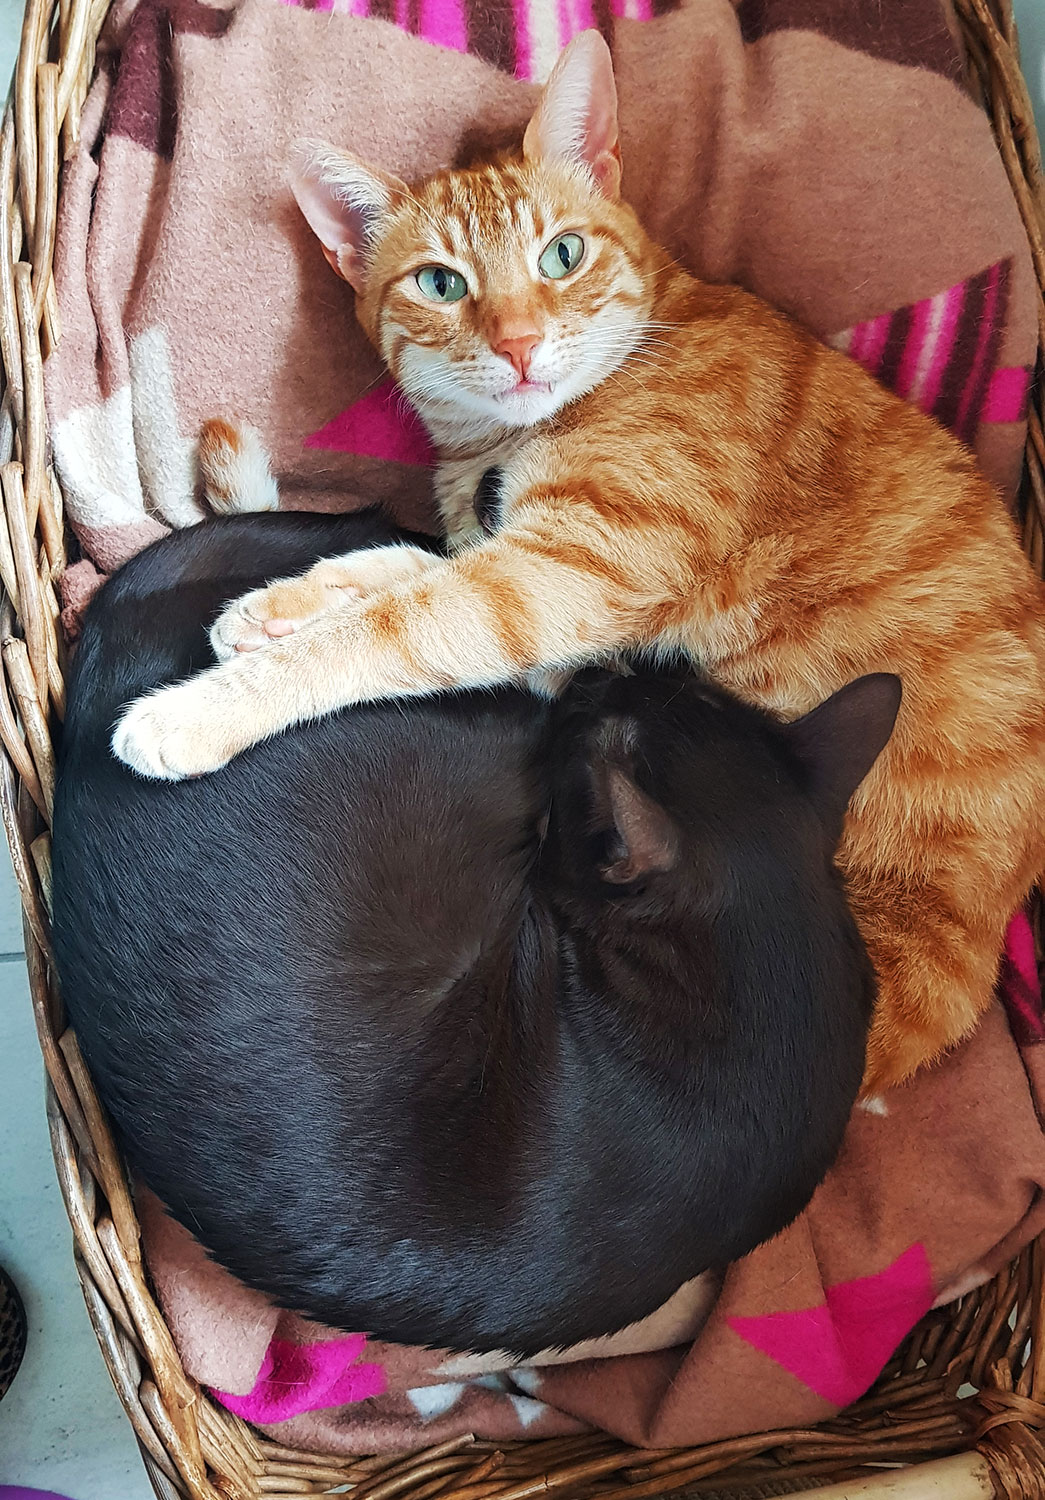 A ginger cat making eye contact with the camera, lying in a blanket-filled basket, embracing a dark brown cat who is curled up asleep.